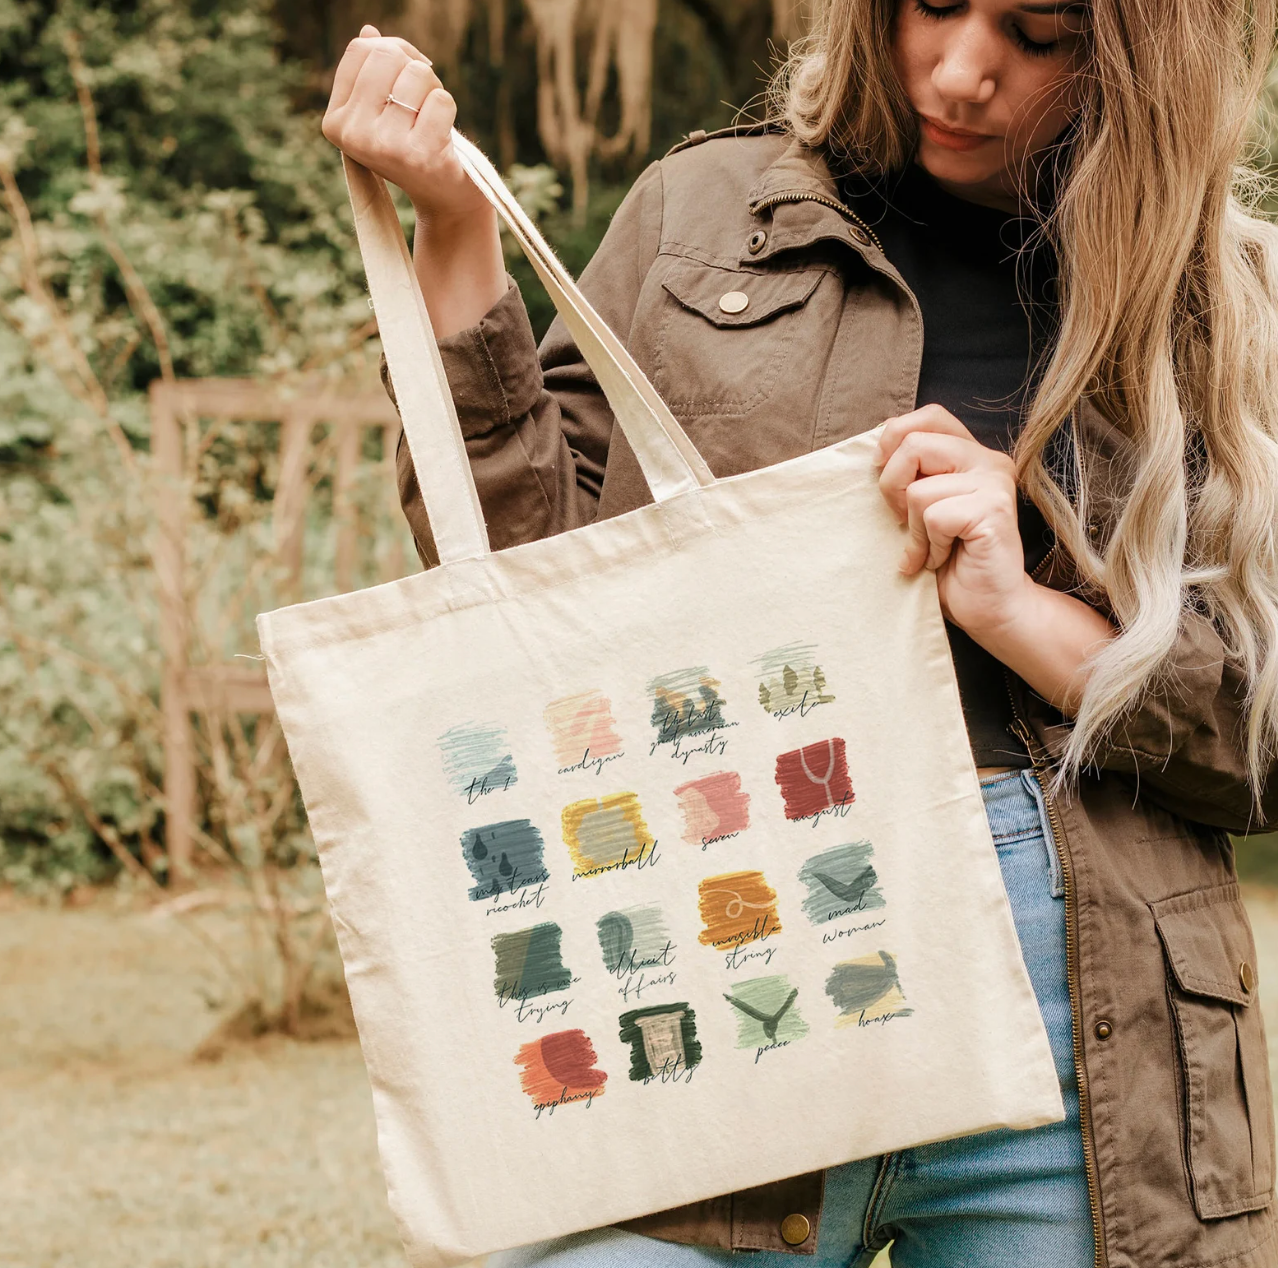 model holding the tote bag